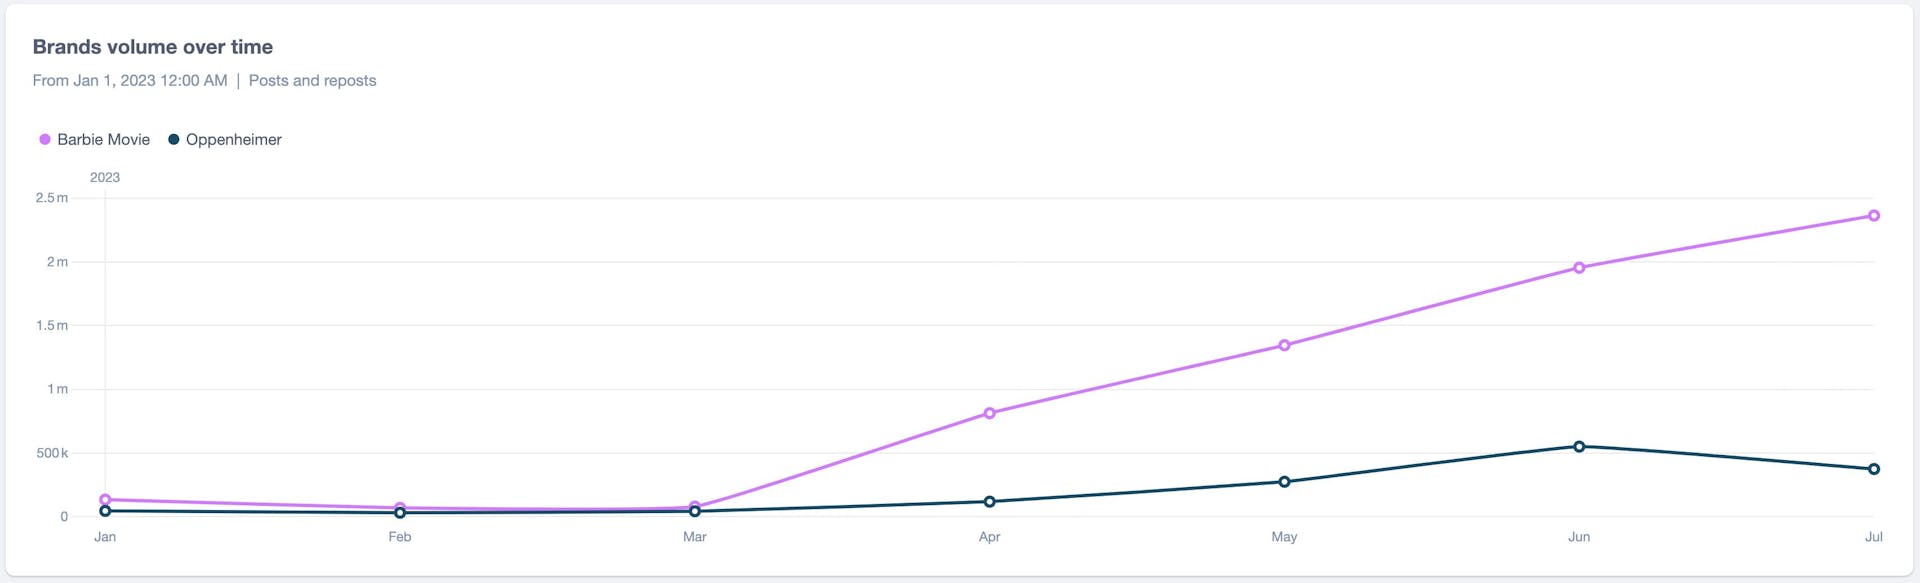 A line graph showing a higher volume of social media posts about the Barbie movie than those about Oppenheimer.